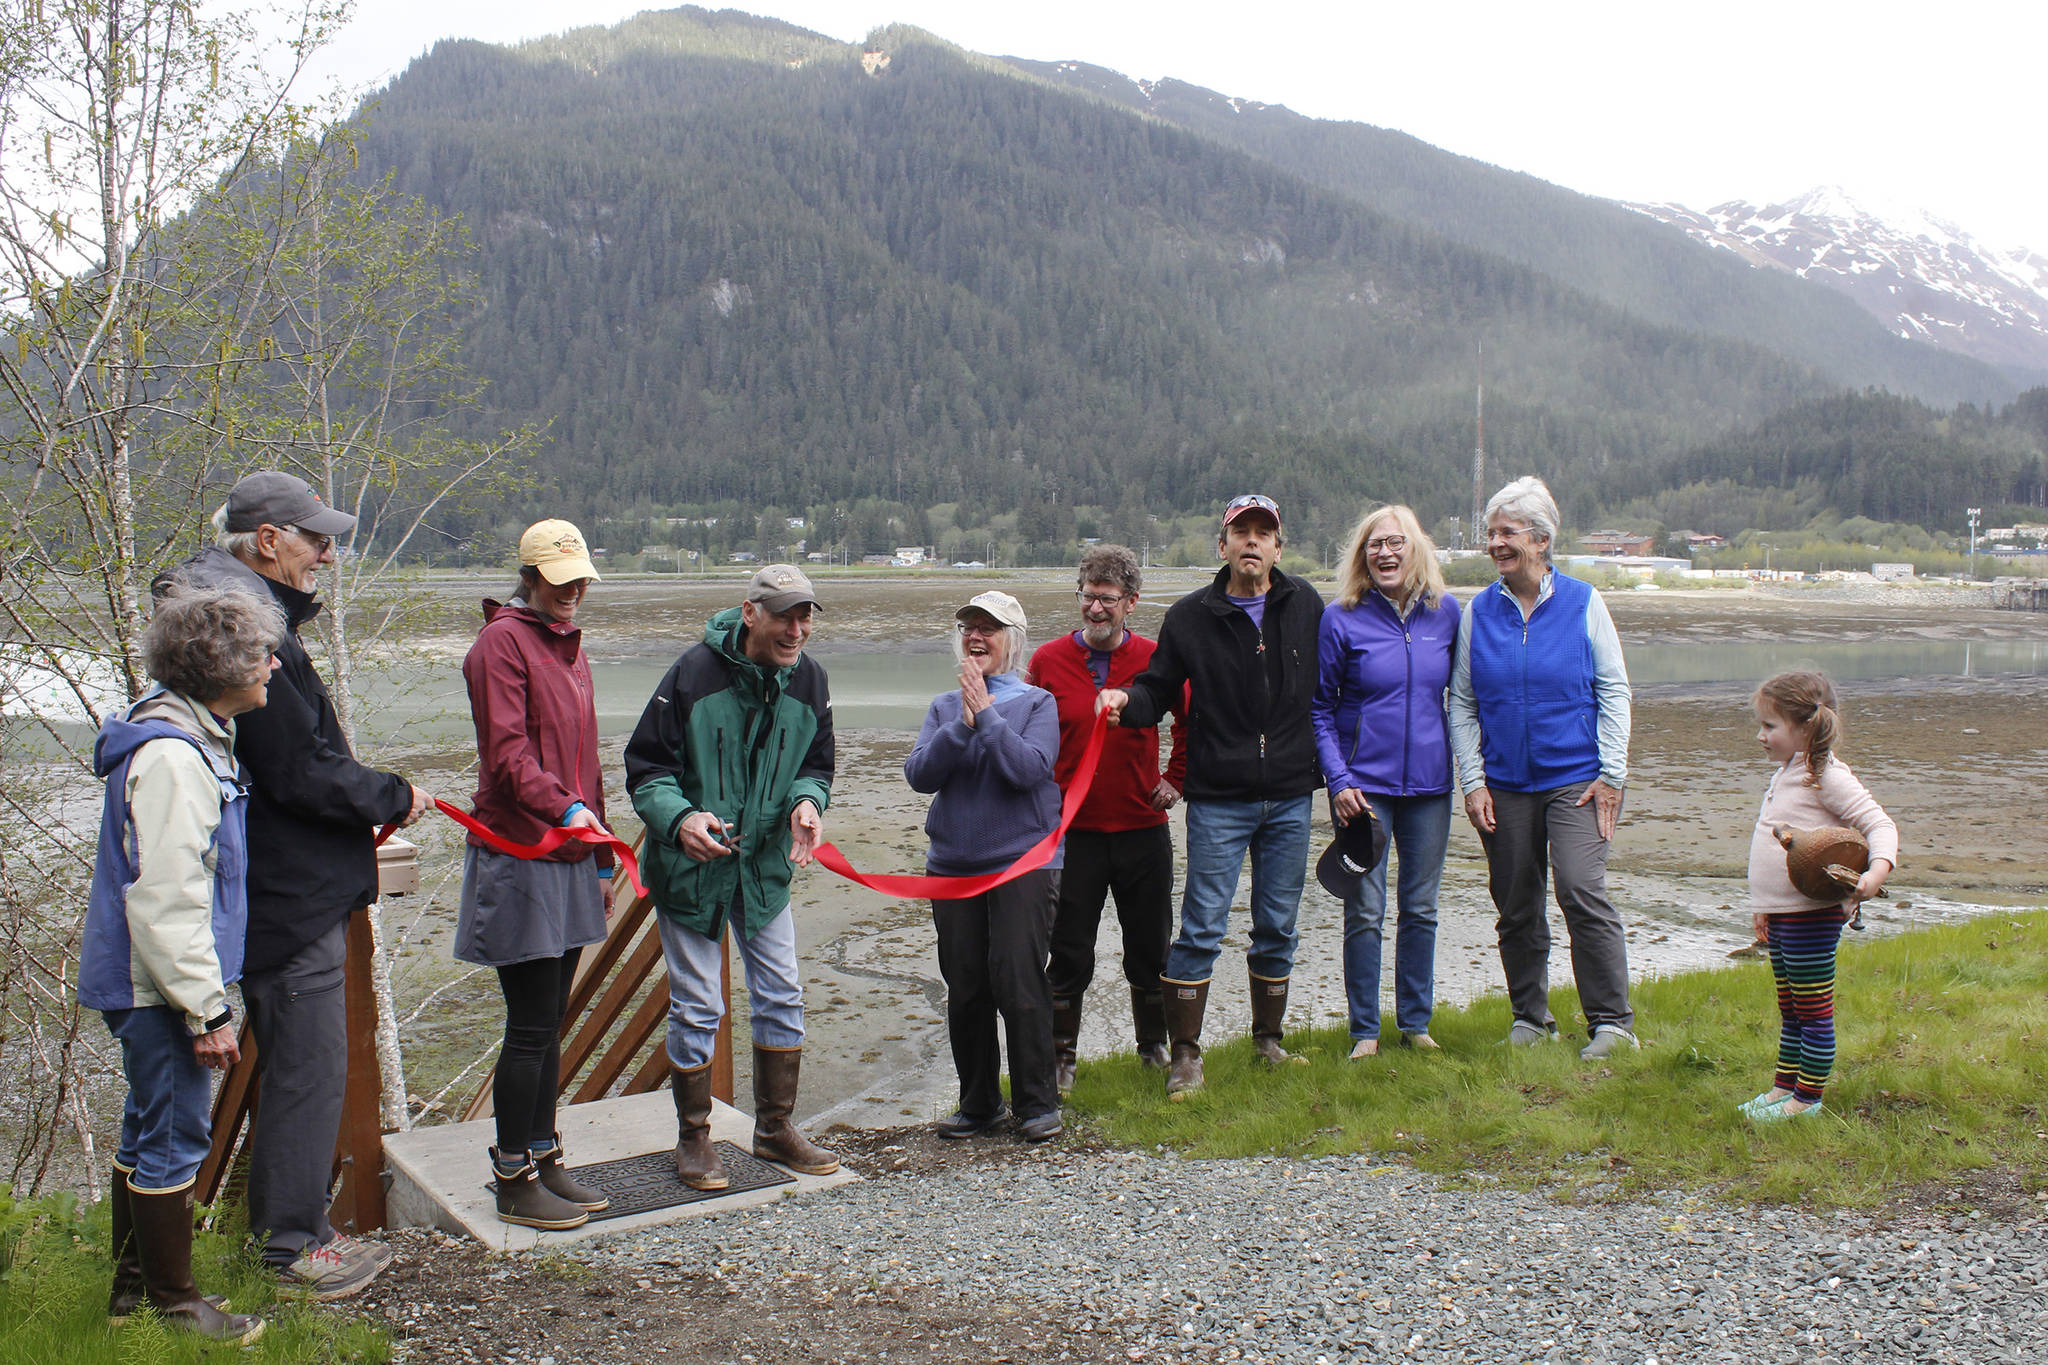 Donors and members of the Southeast Alaska Land Trust board cut a ceremonial ribbon to celebrate the opening of the Marjory and Edgar Huizer Fishing Access Site on Saturday, May 11, 2019. (Alex McCarthy | Juneau Empire)